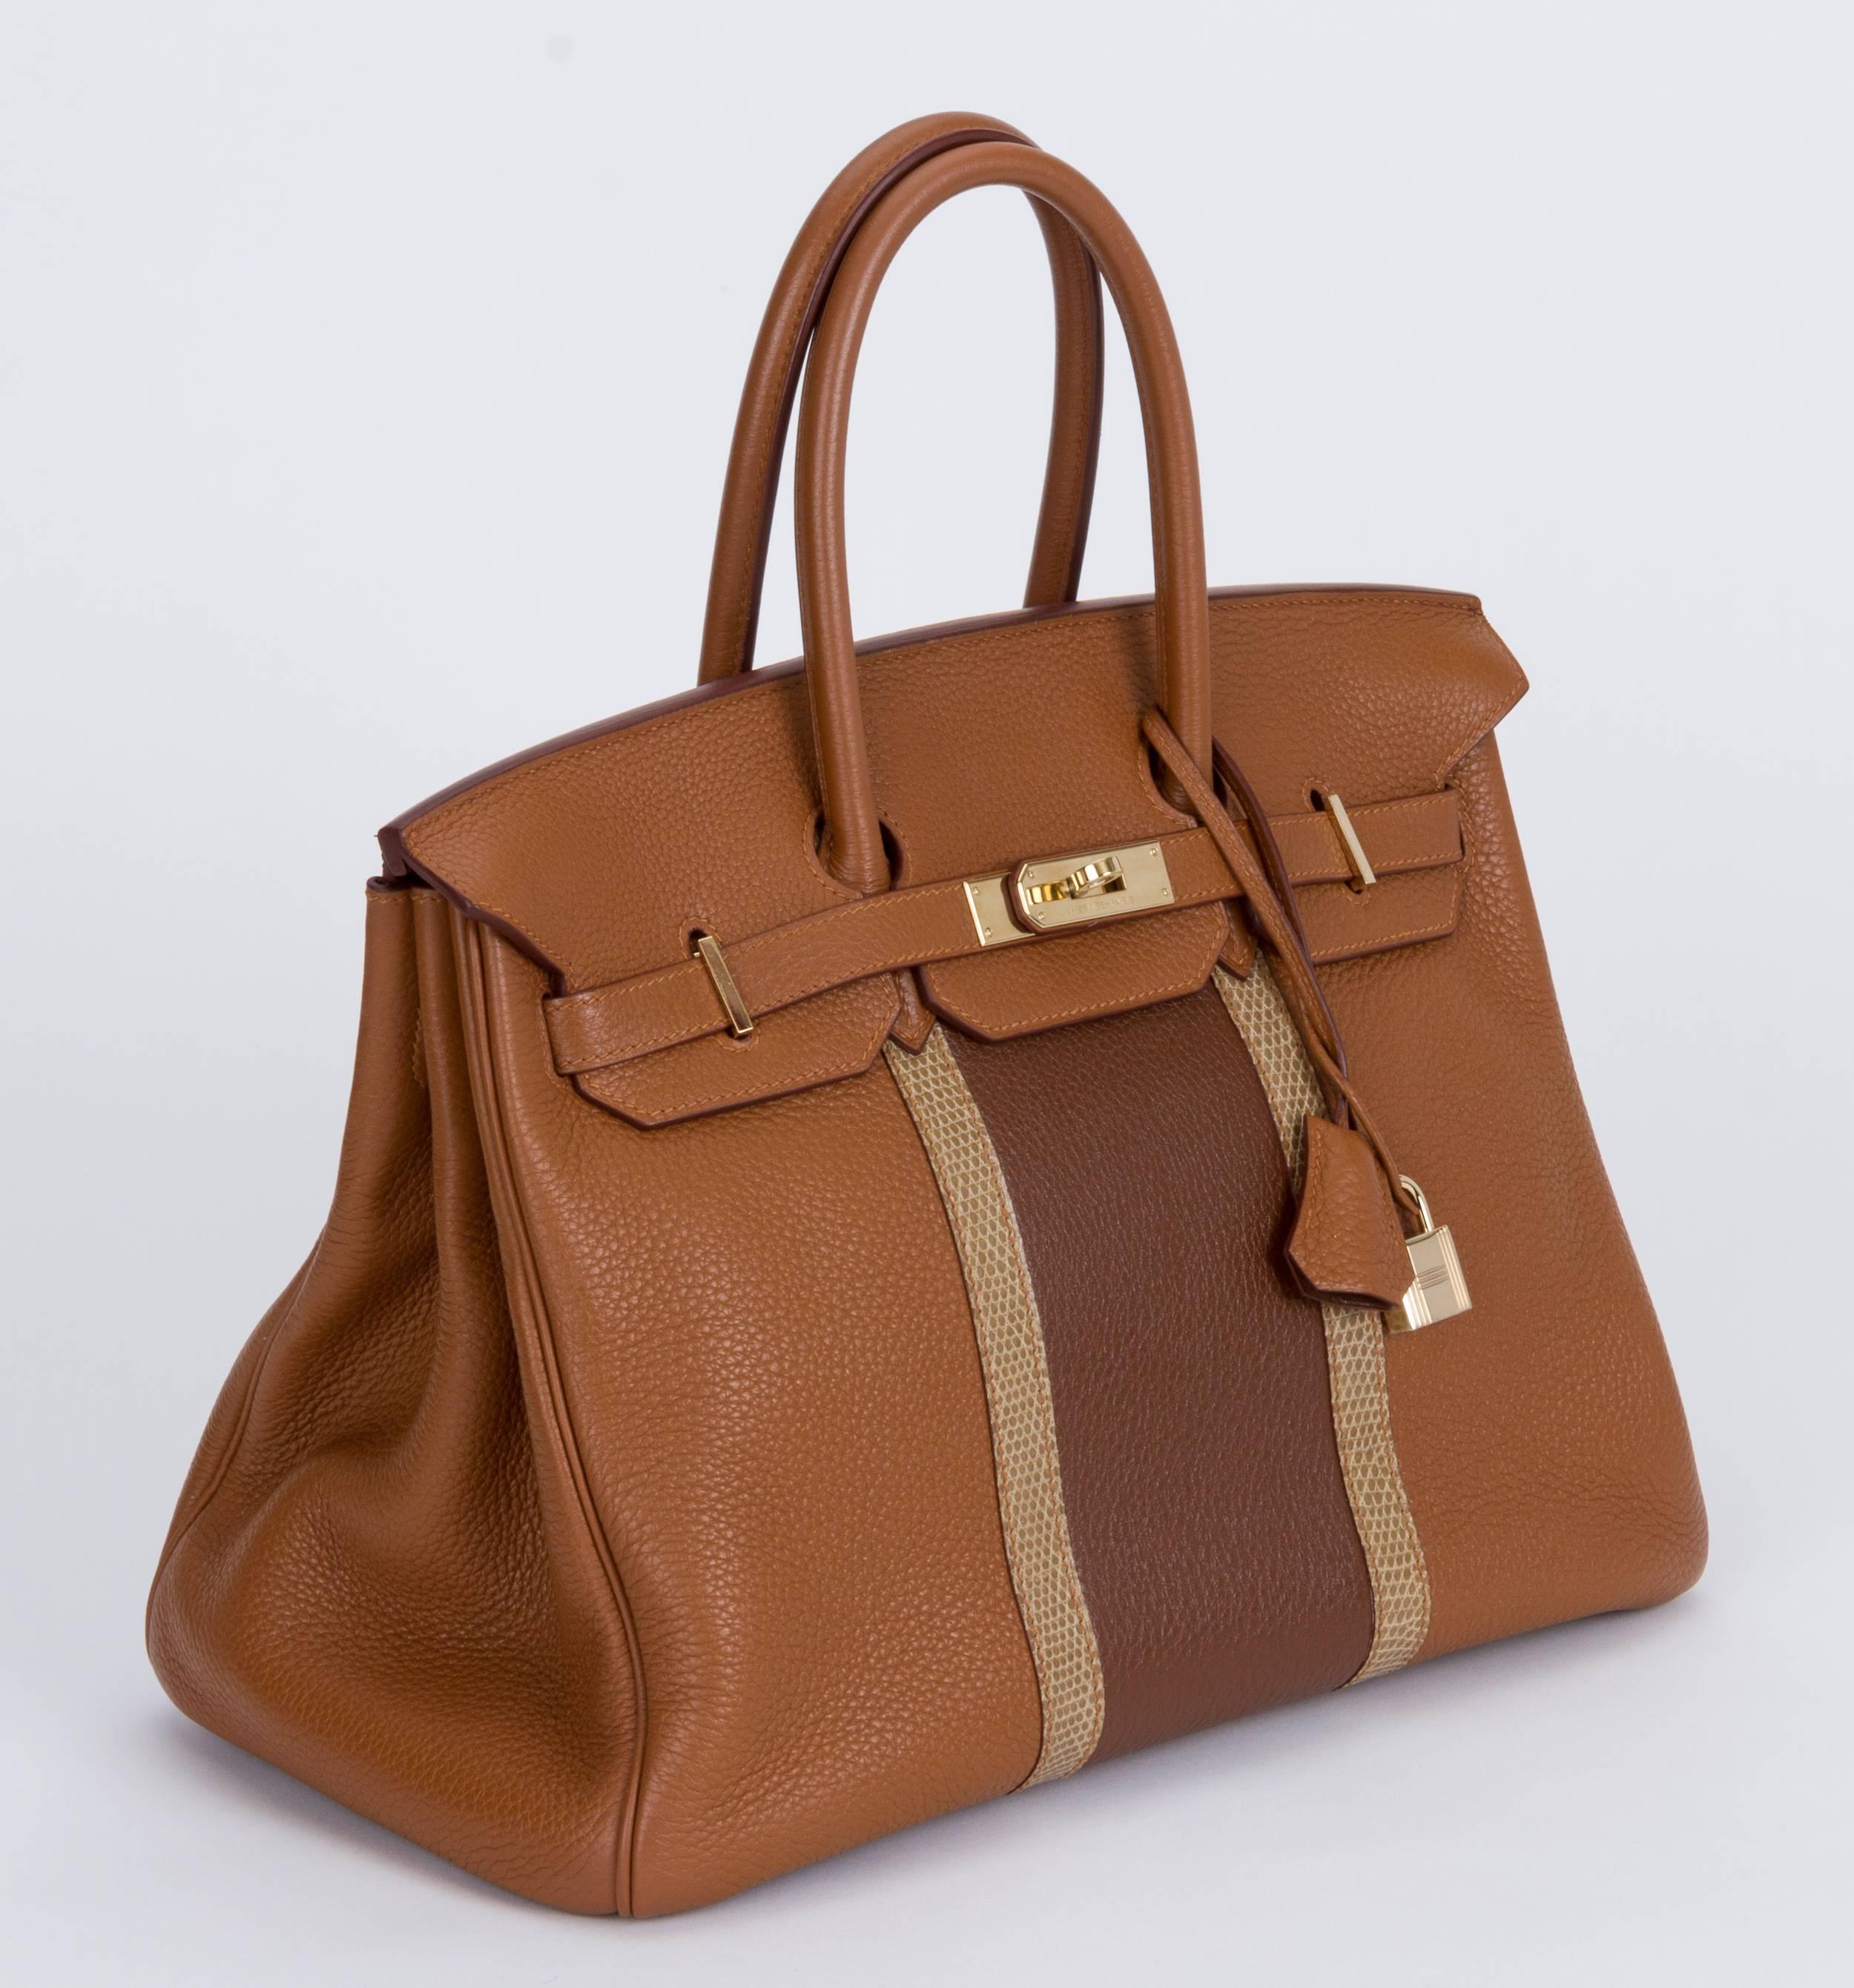 Hermès rare and collectible birkin 35 cm club gold, marron d'inde and ficelle. Preambles leather. Excellent condition, used only a few times. Date stamp O for 2011. Comes with lock, keys, clotted, tirette, rain jacket, protective felt, dust bag, box